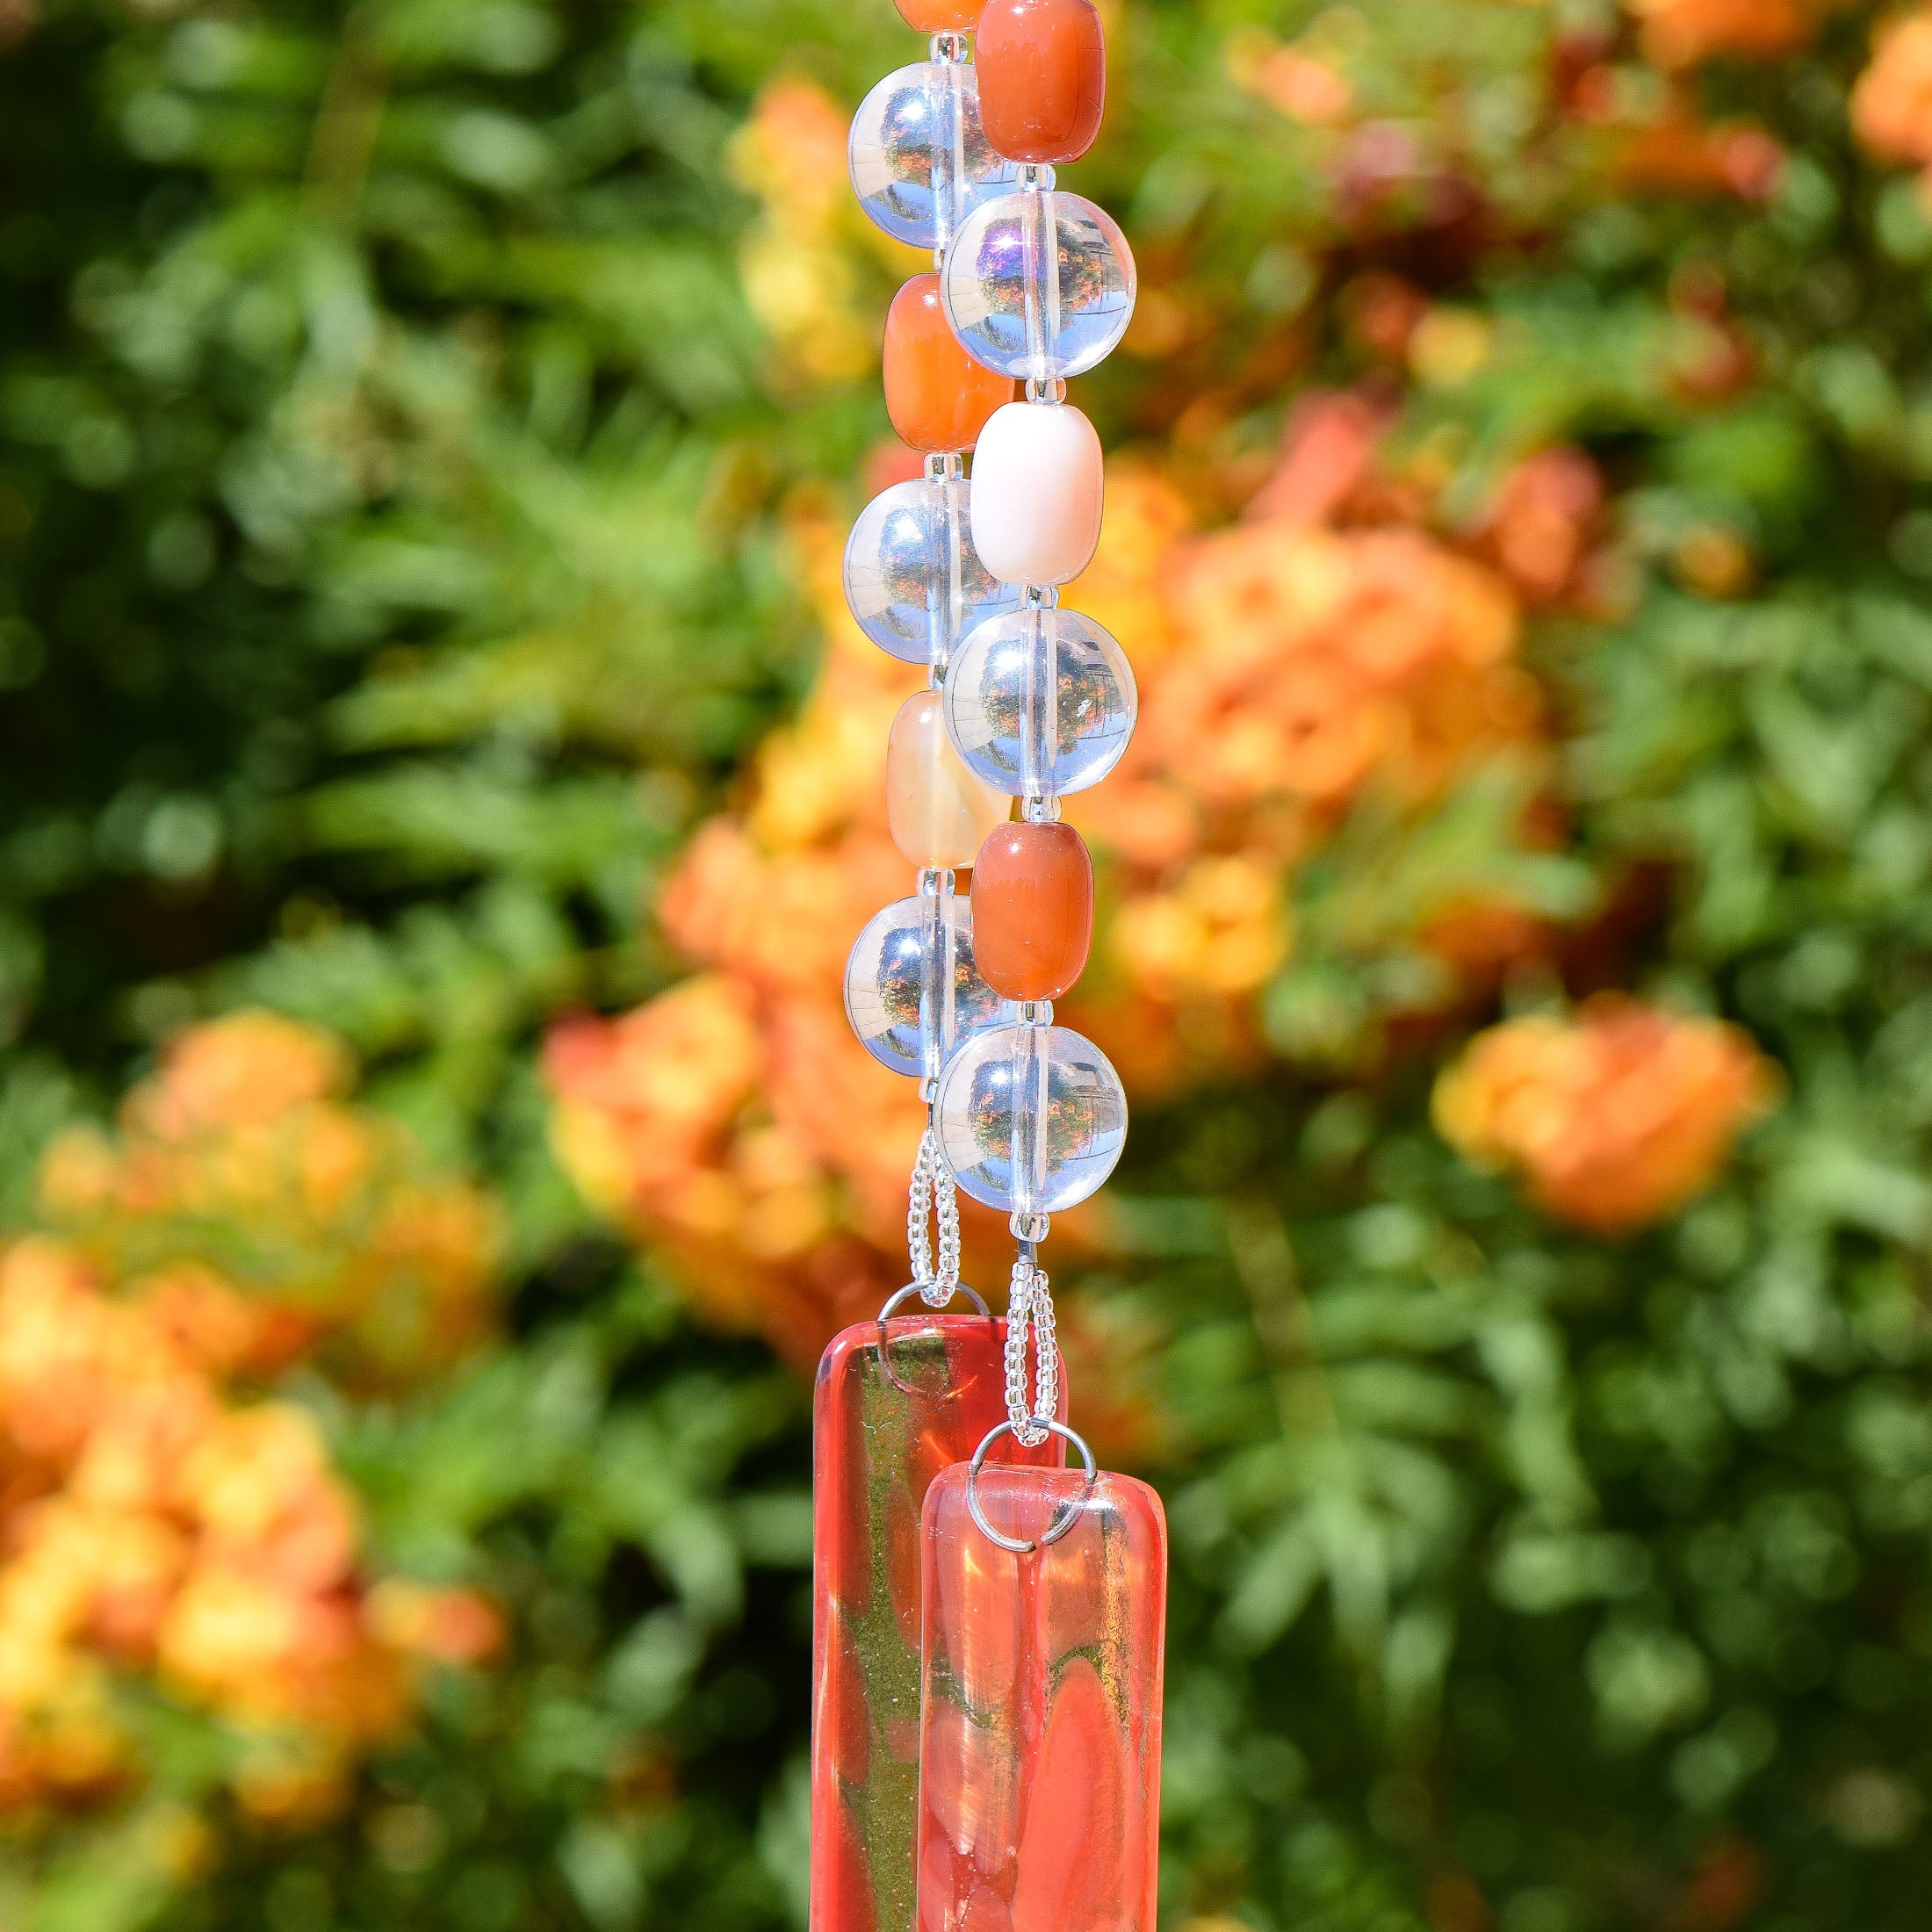 Orange Carnelian agate stone beads paired with large, solid glass clear beads, strung and hanging vertically, anchored by two pieces of orange and clear fused glass. Background is a shrub with orange flowers.